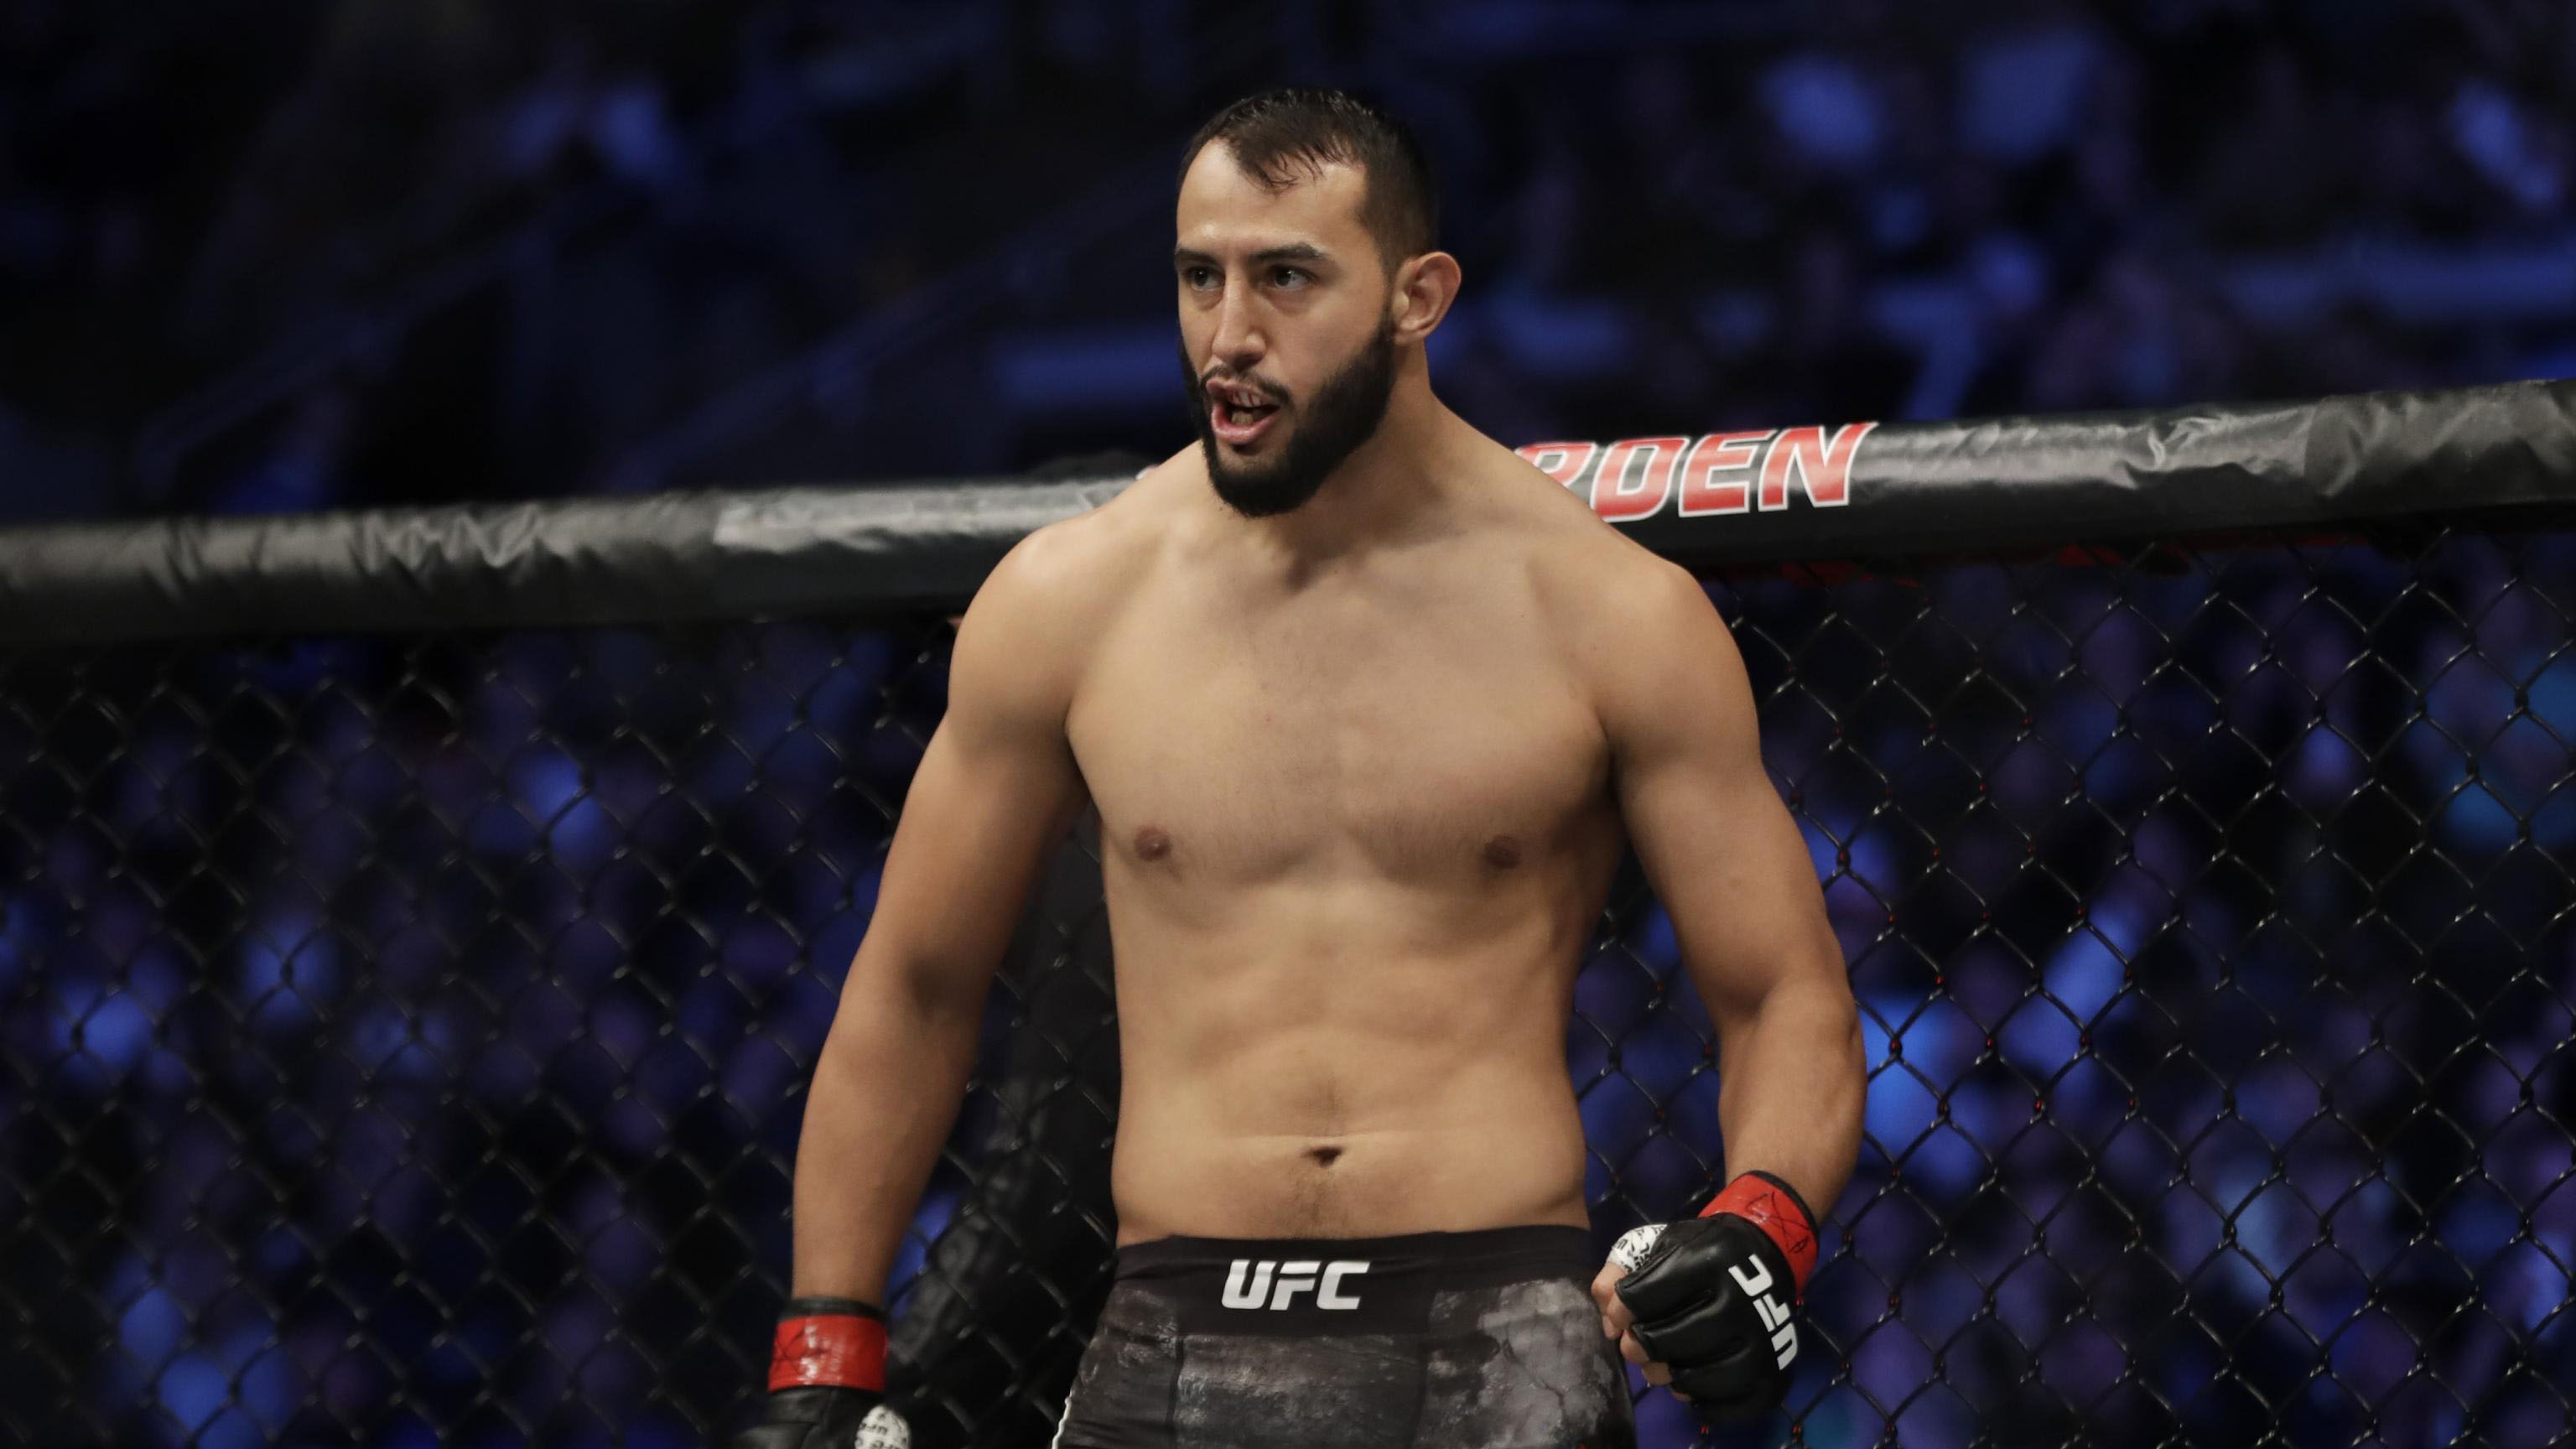 Dominick Reyes (born December 26, 1989) is an American professional mixed martial artist and former college football player. He currently competes in ...